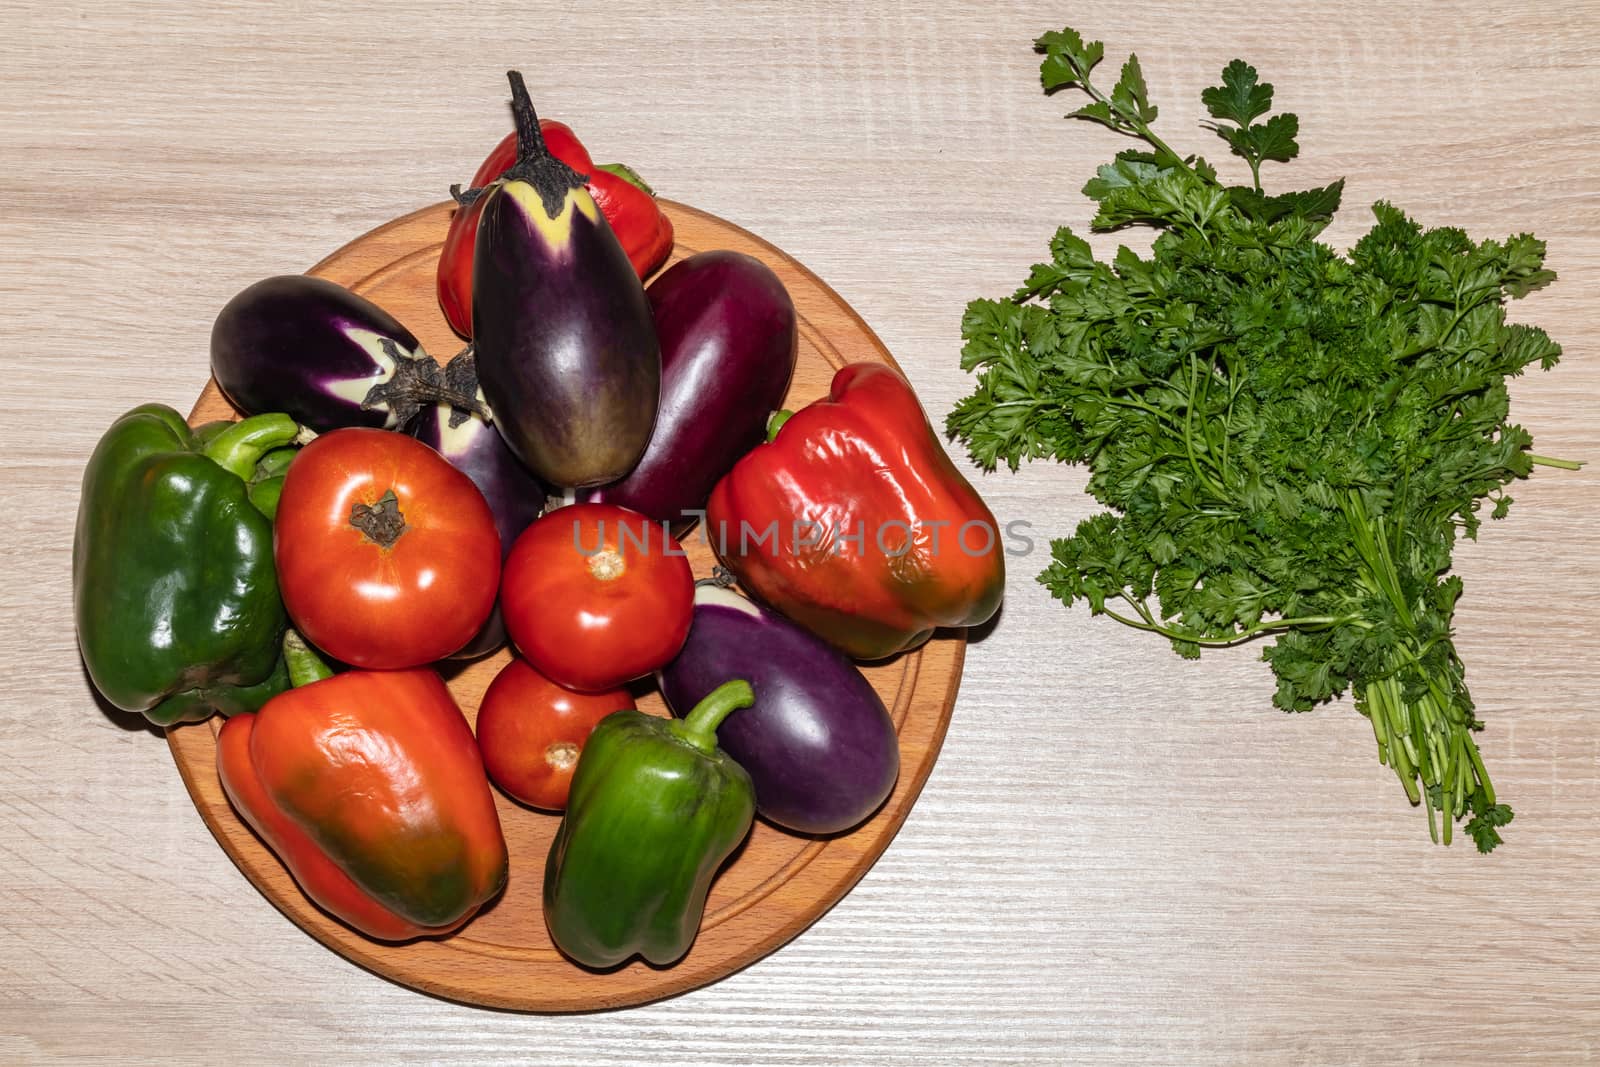 A top close-up shot of various vegetables like tomatoes, parsley, peppers, eggplants lying on a wooden cooking board. Isolated on wooden background.